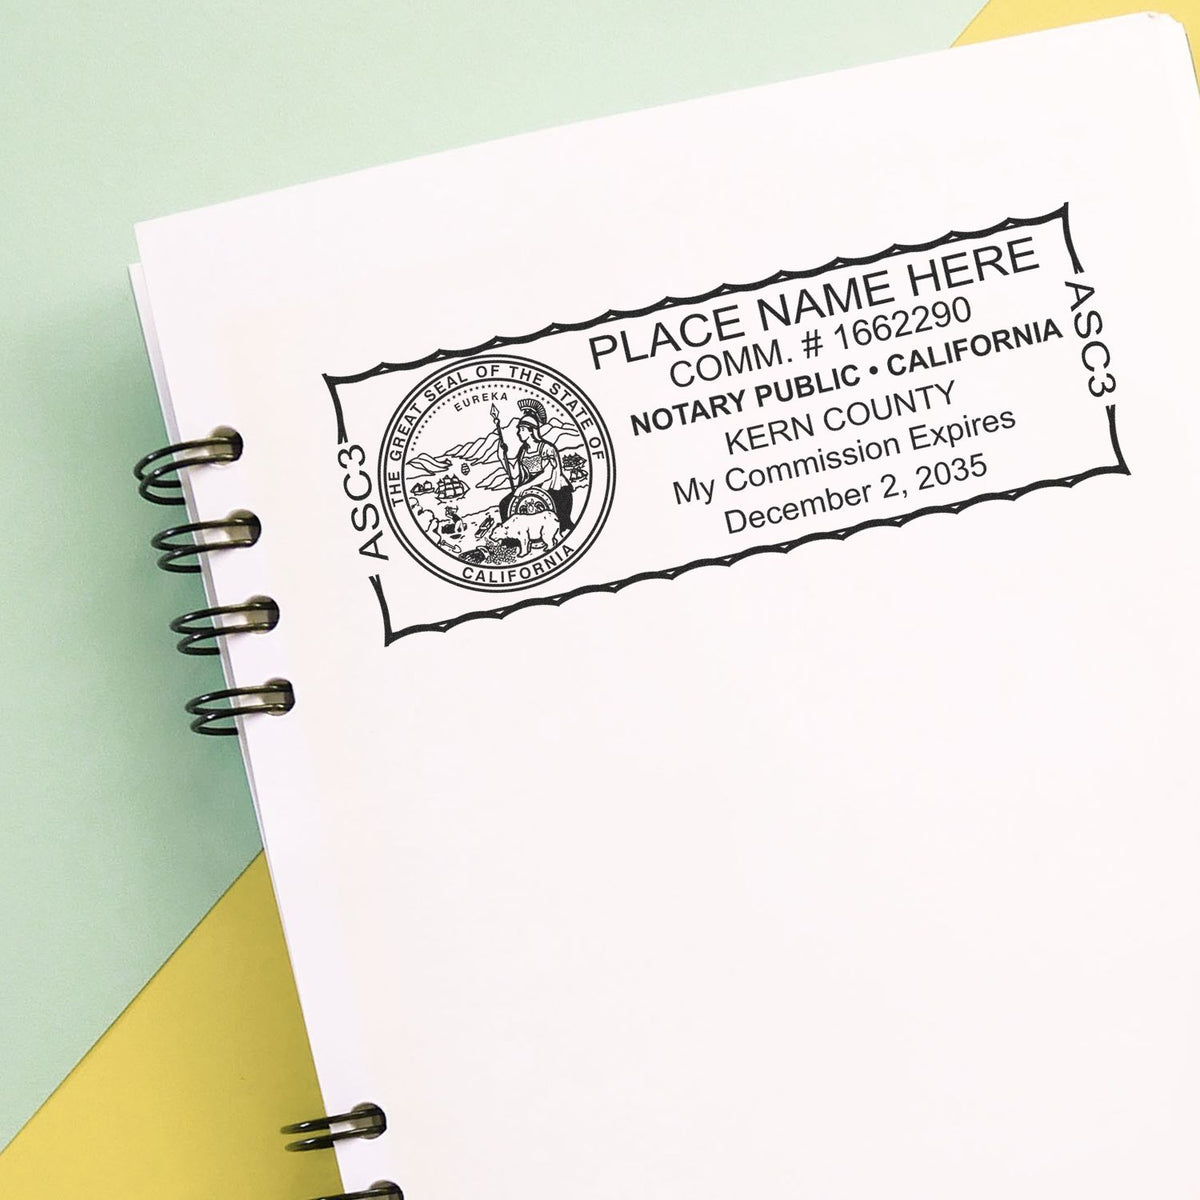 This paper is stamped with a sample imprint of the Super Slim California Notary Public Stamp, signifying its quality and reliability.